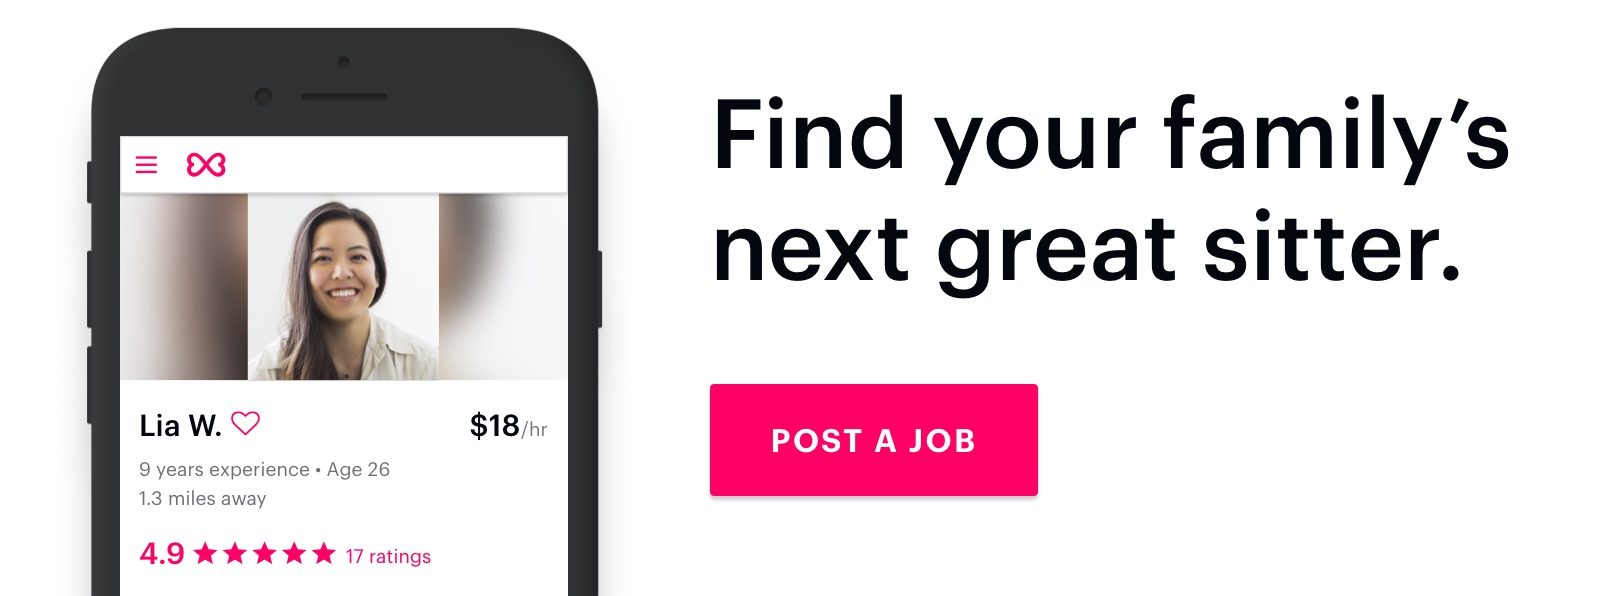 Find your family's next great sitter. Post a job. CTA